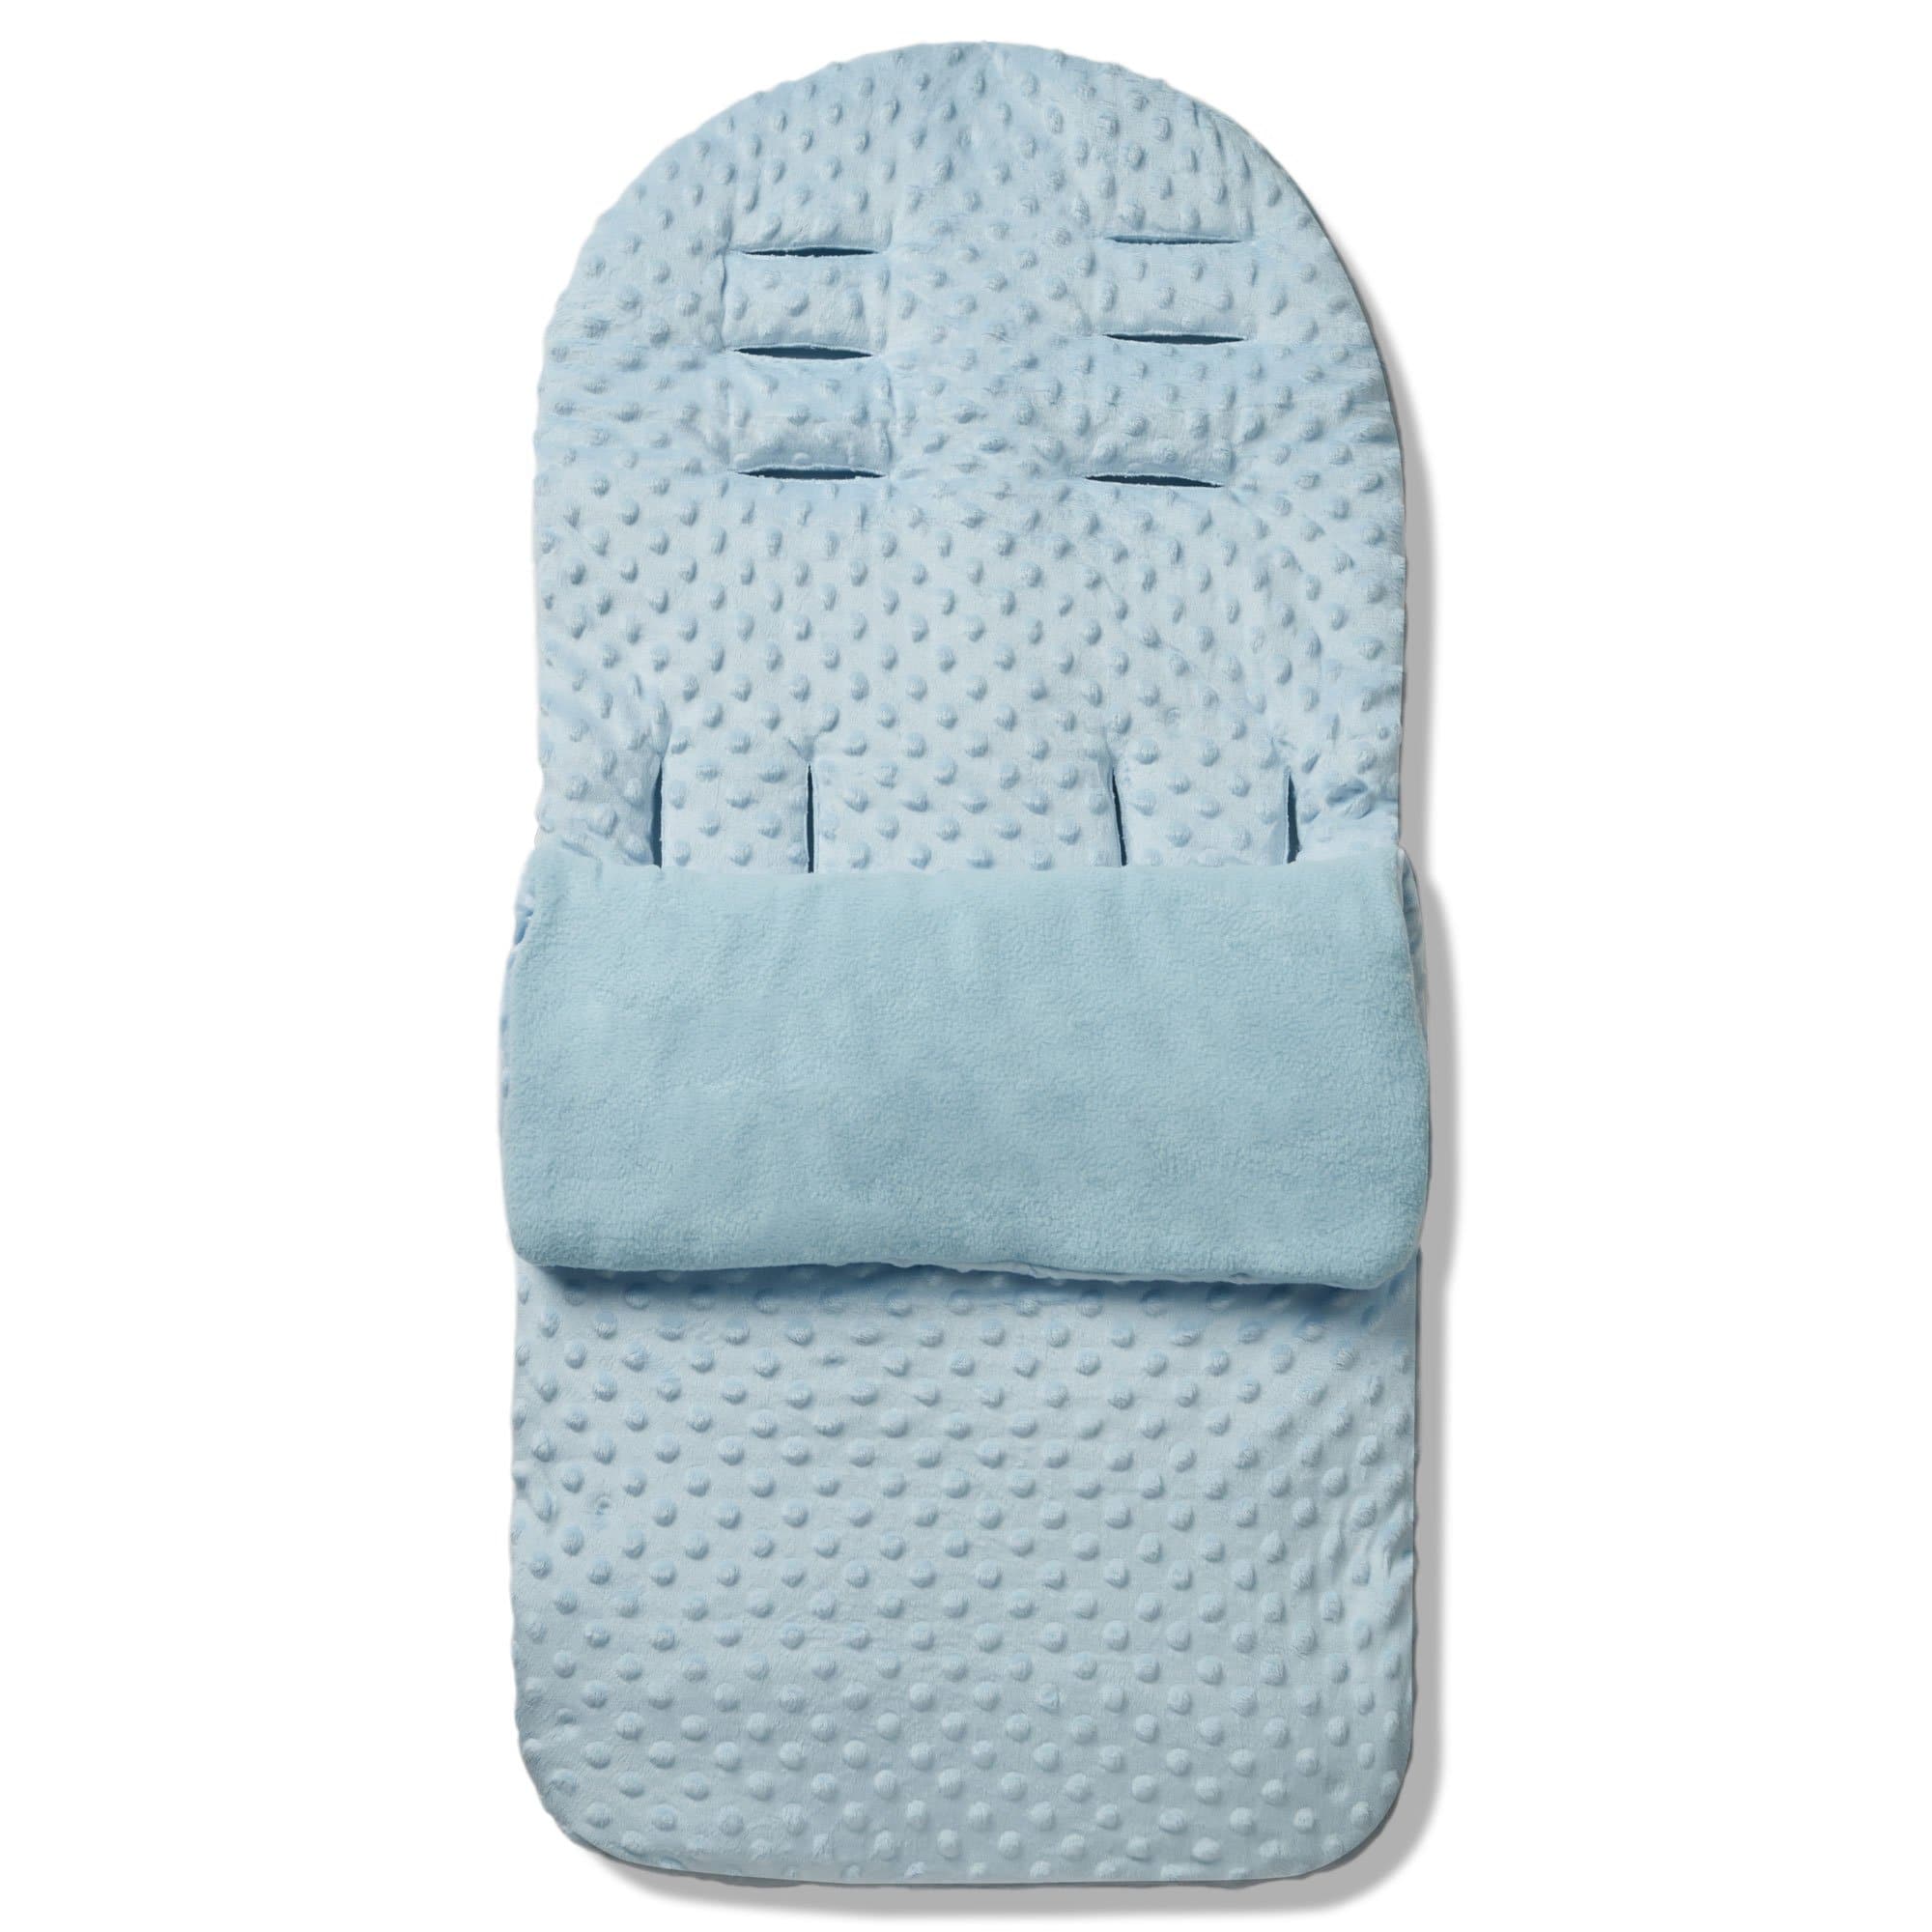 Dimple Footmuff / Cosy Toes Compatible with Greentom - Blue / Fits All Models | For Your Little One